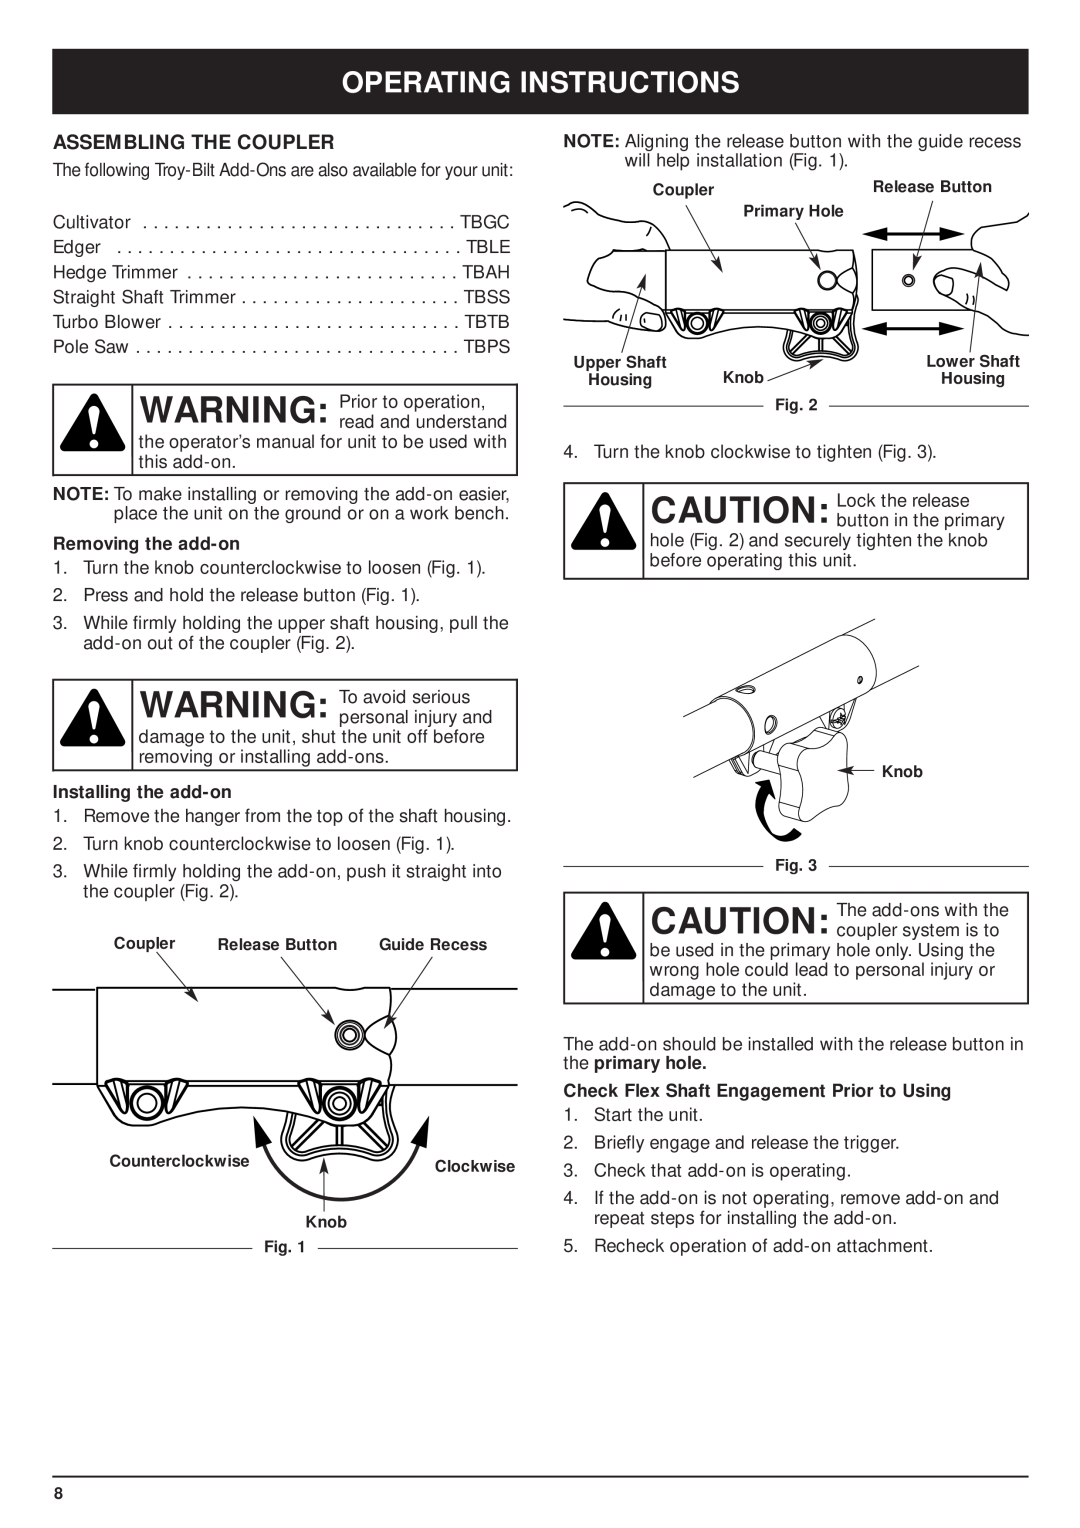 MTD TBPS manual Operating Instructions, Assembling The Coupler, Removing the add-on, Installing the add-on 